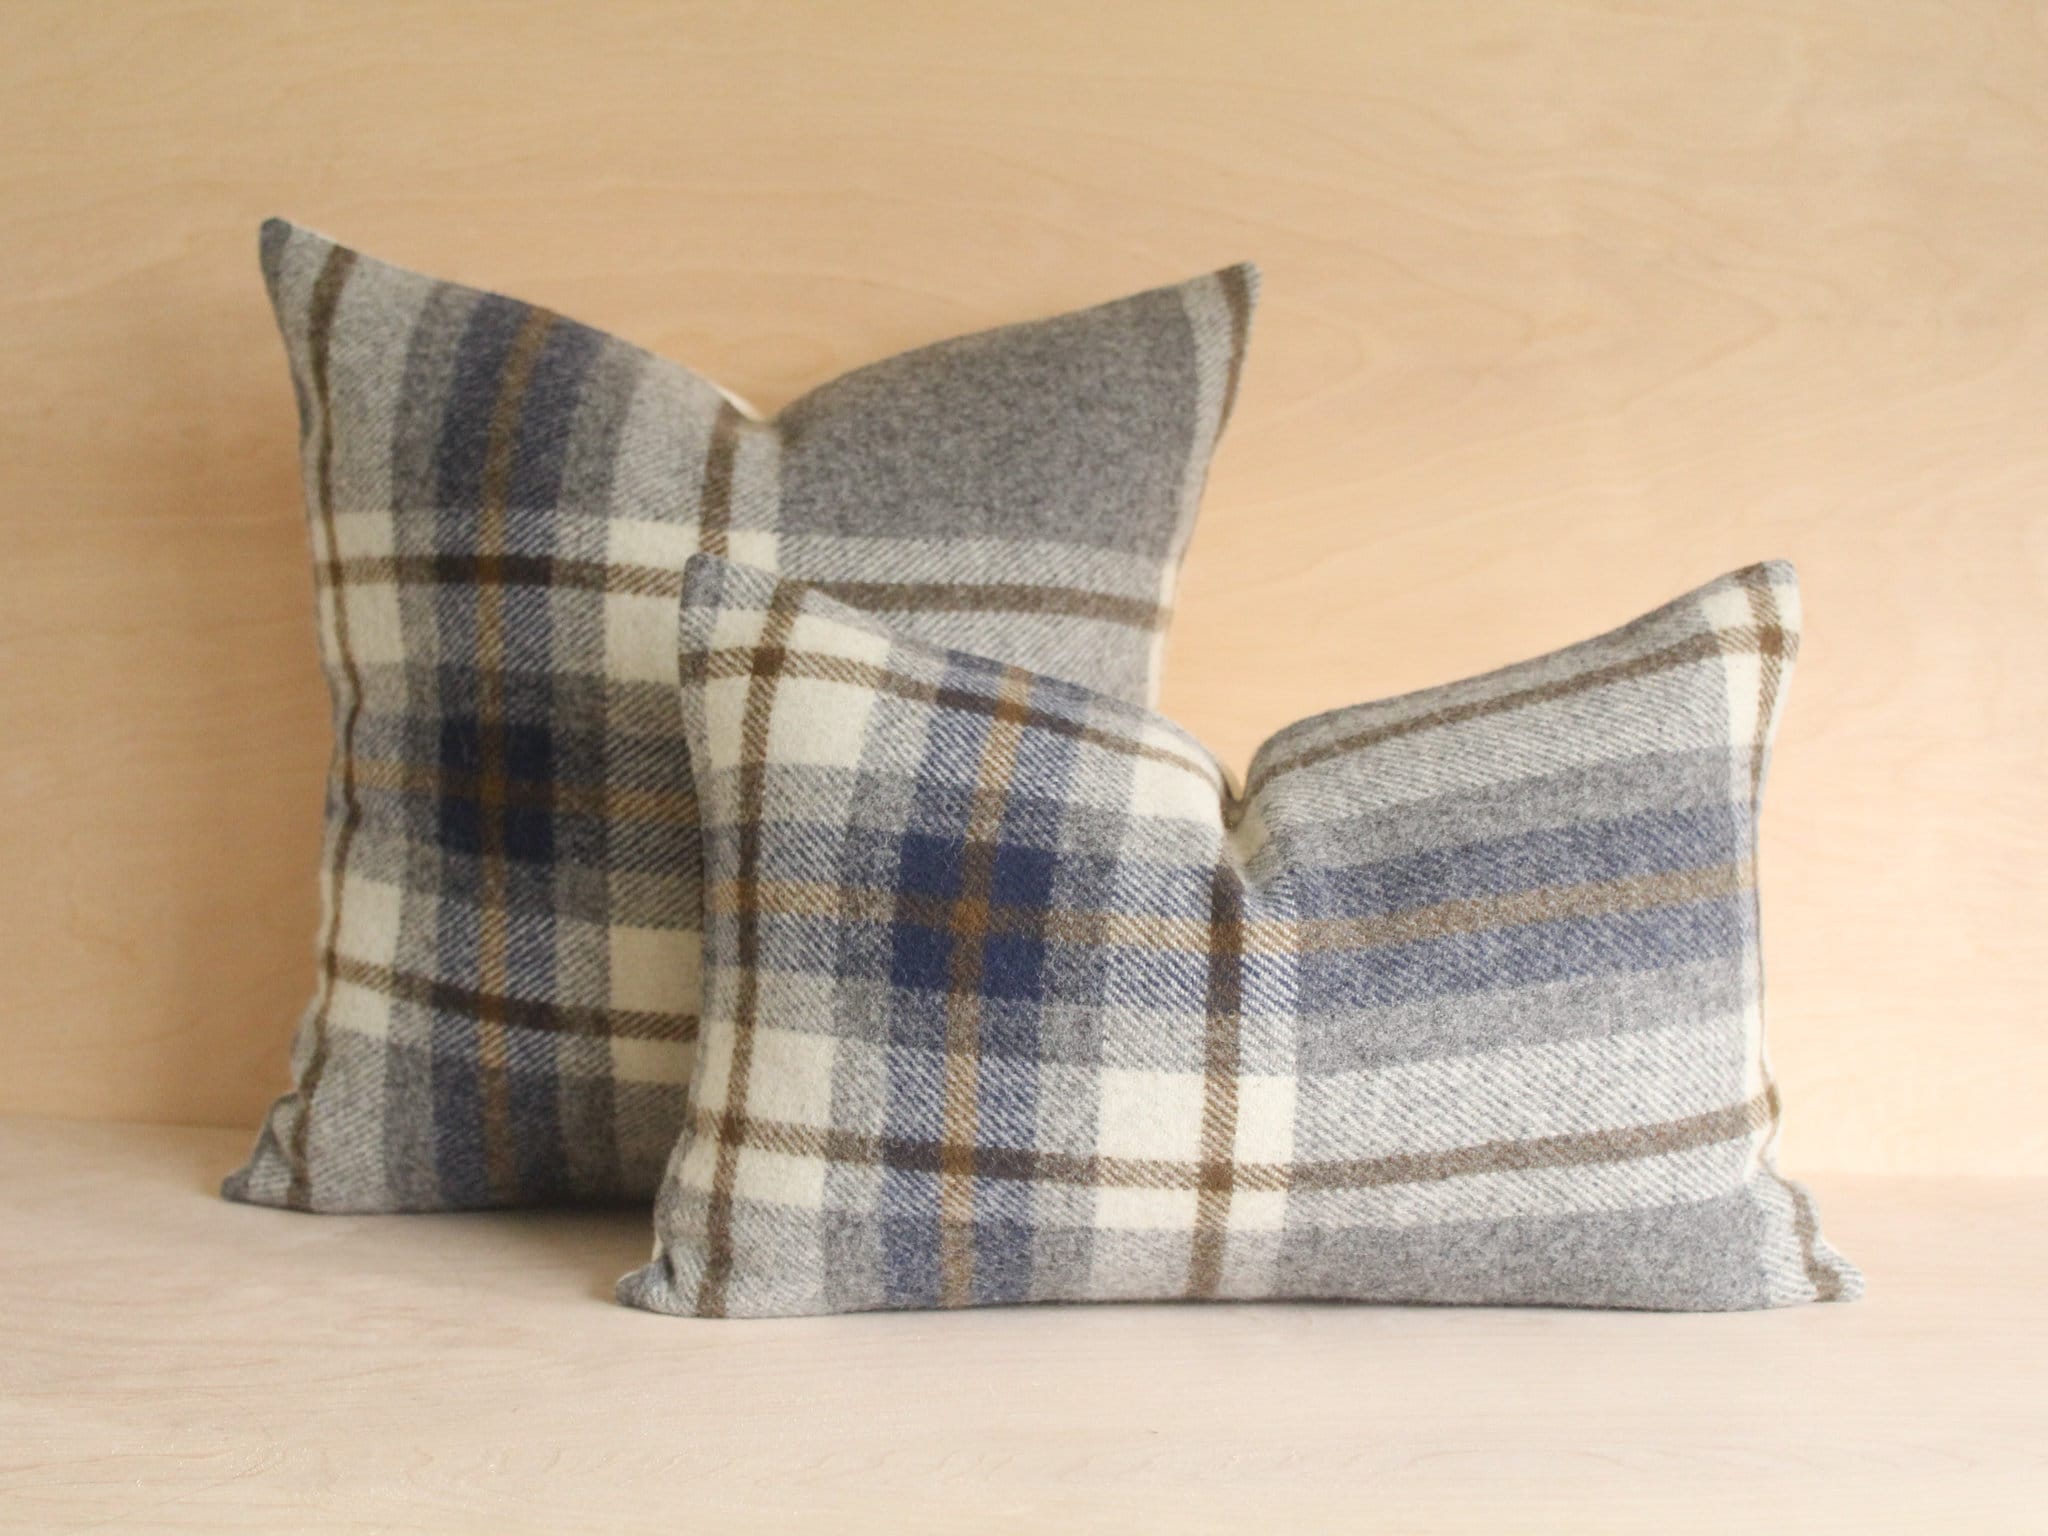 Tartan Pillow Cover With Furs, Winter Fall Throw Pillow Cover for  Couch,yarn-dyed Plaid Cushion Cover, Christmas Pillow Cover 18 X 18 Inches  